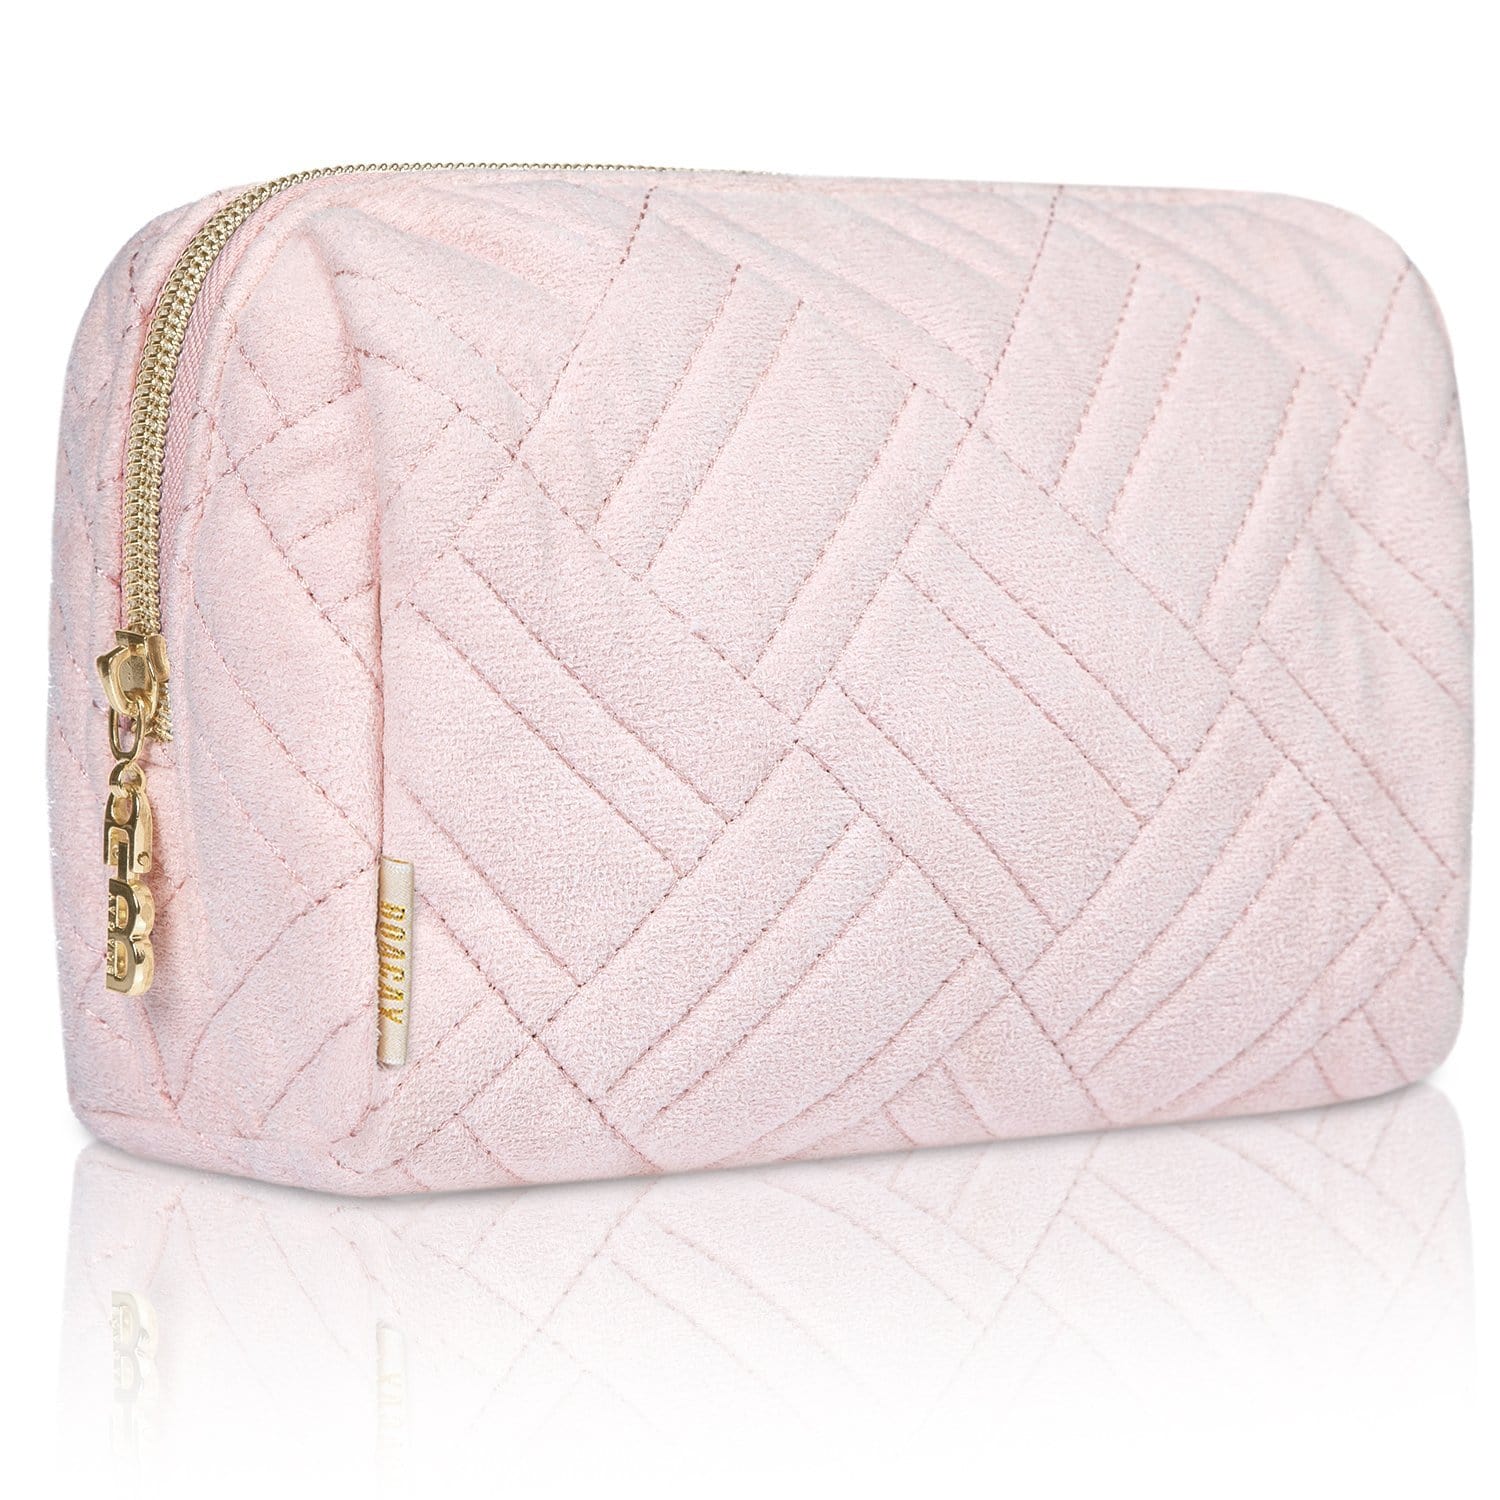 Pink Travel Toiletry Bag with multiple compartments for a perfect organization of your cosmetics. It is waterproof and perfect for travel, camping or business trips. Practical and Portable, this cosmetic bag is ideal for home use, but you can also fit it in your purse when you are on the go.